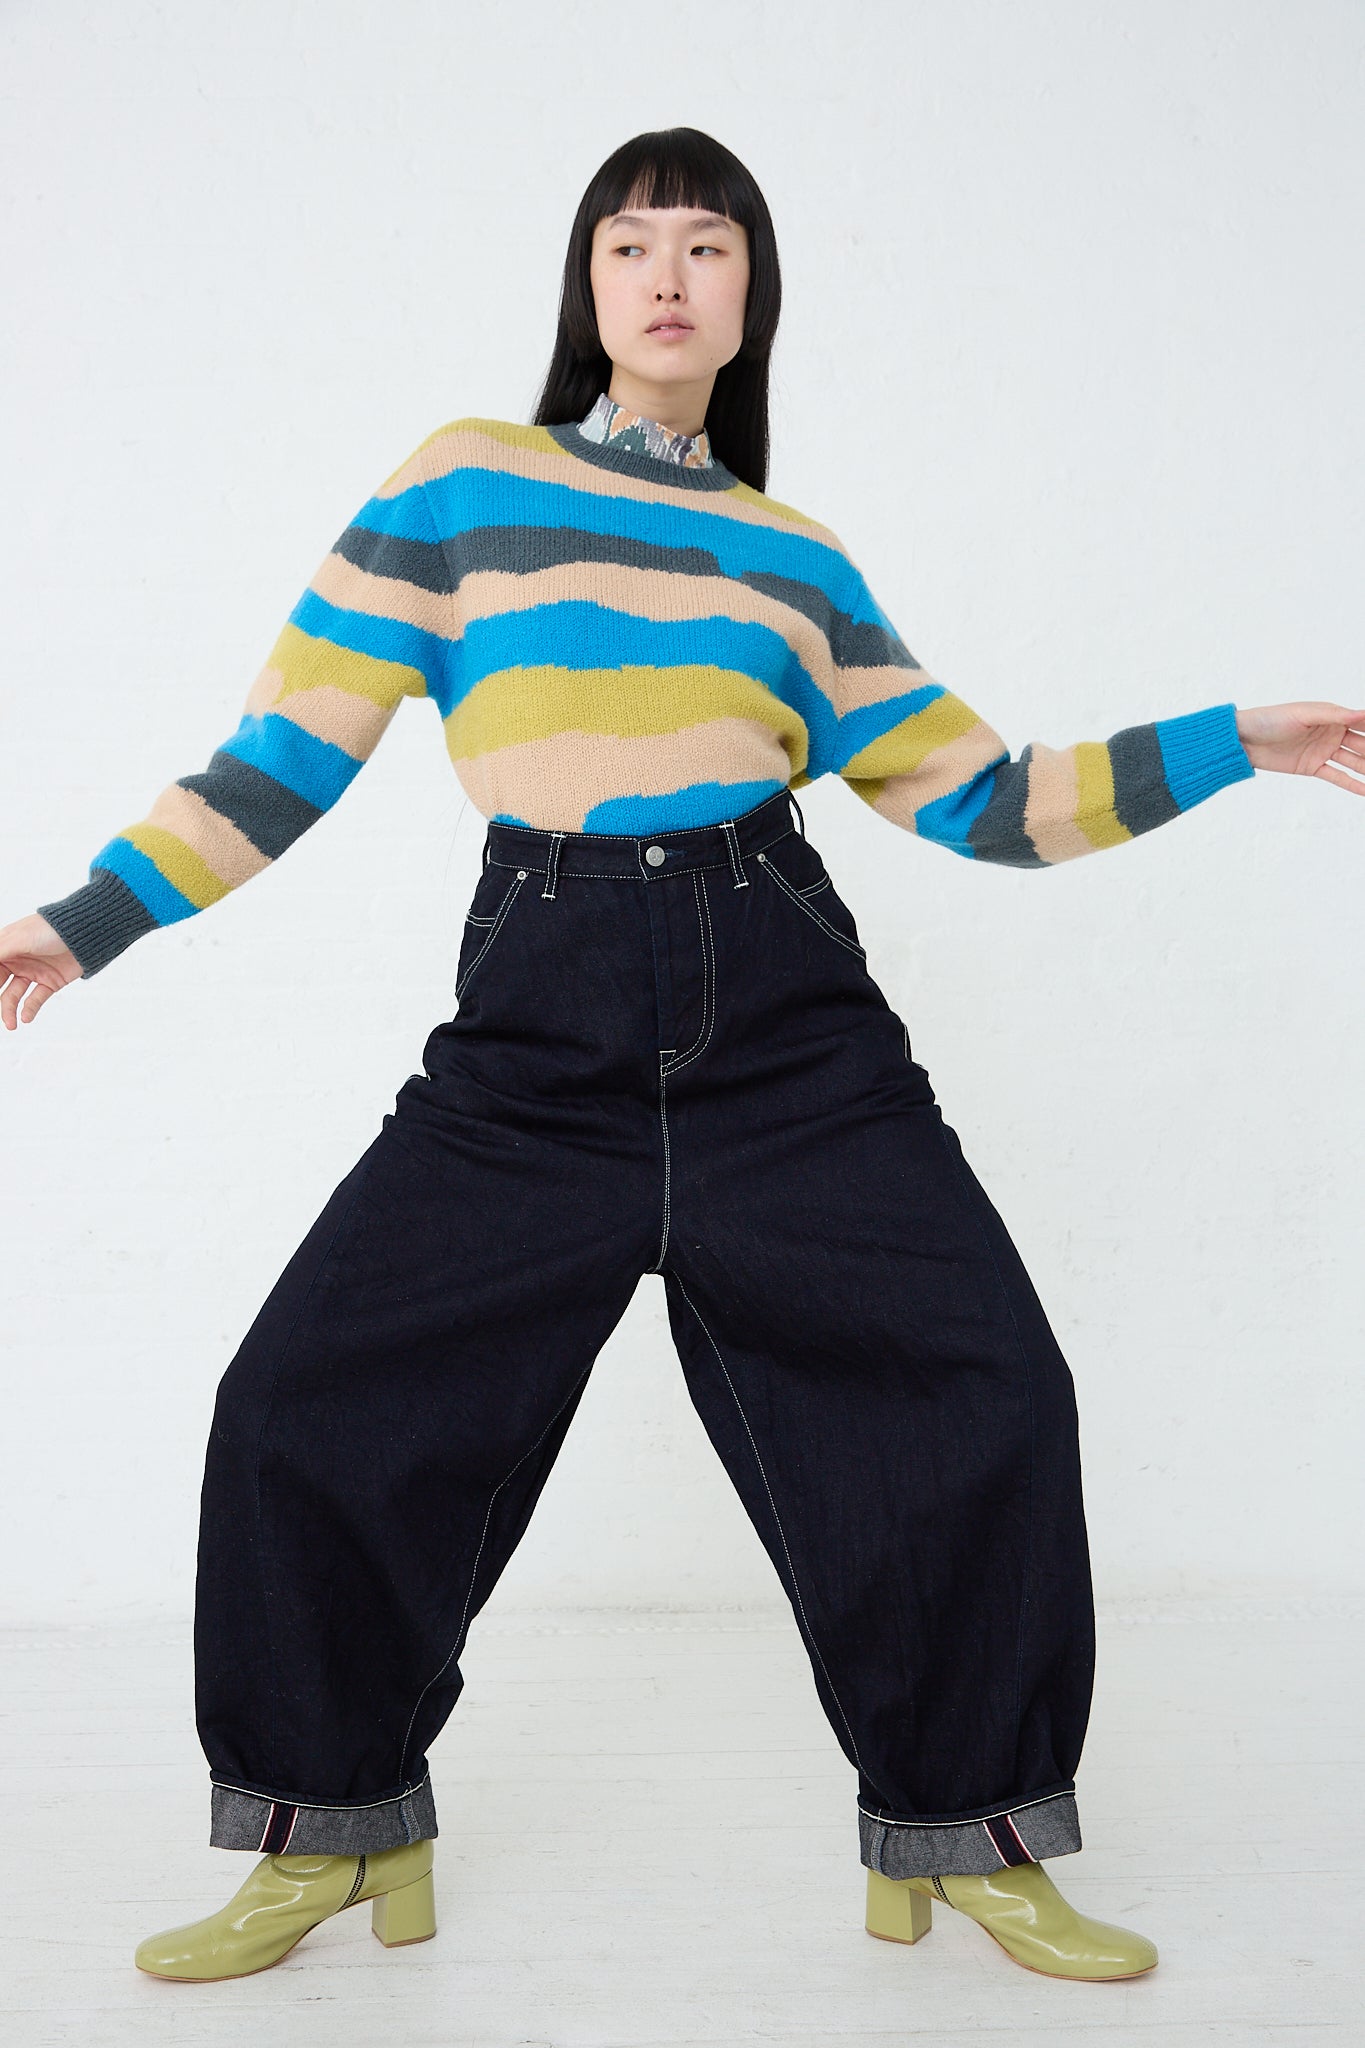 Description: A woman wearing the Mina Perhonen Always Balloon Wide Pant in Indigo and a striped sweater. Full length and front view. Model's arms are raised.